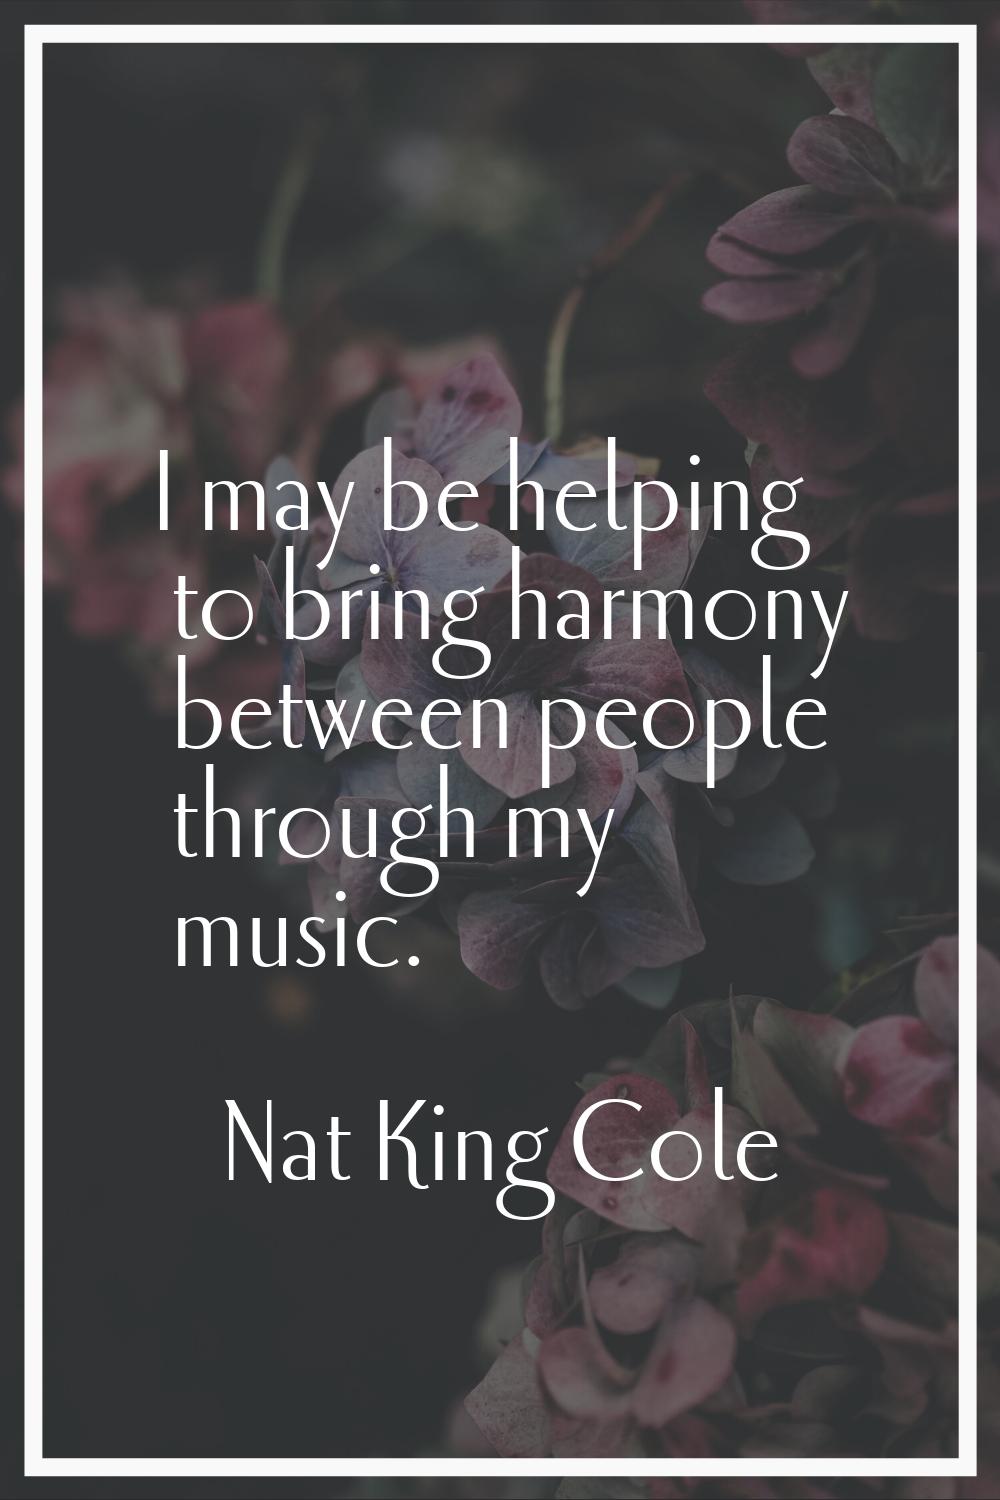 I may be helping to bring harmony between people through my music.